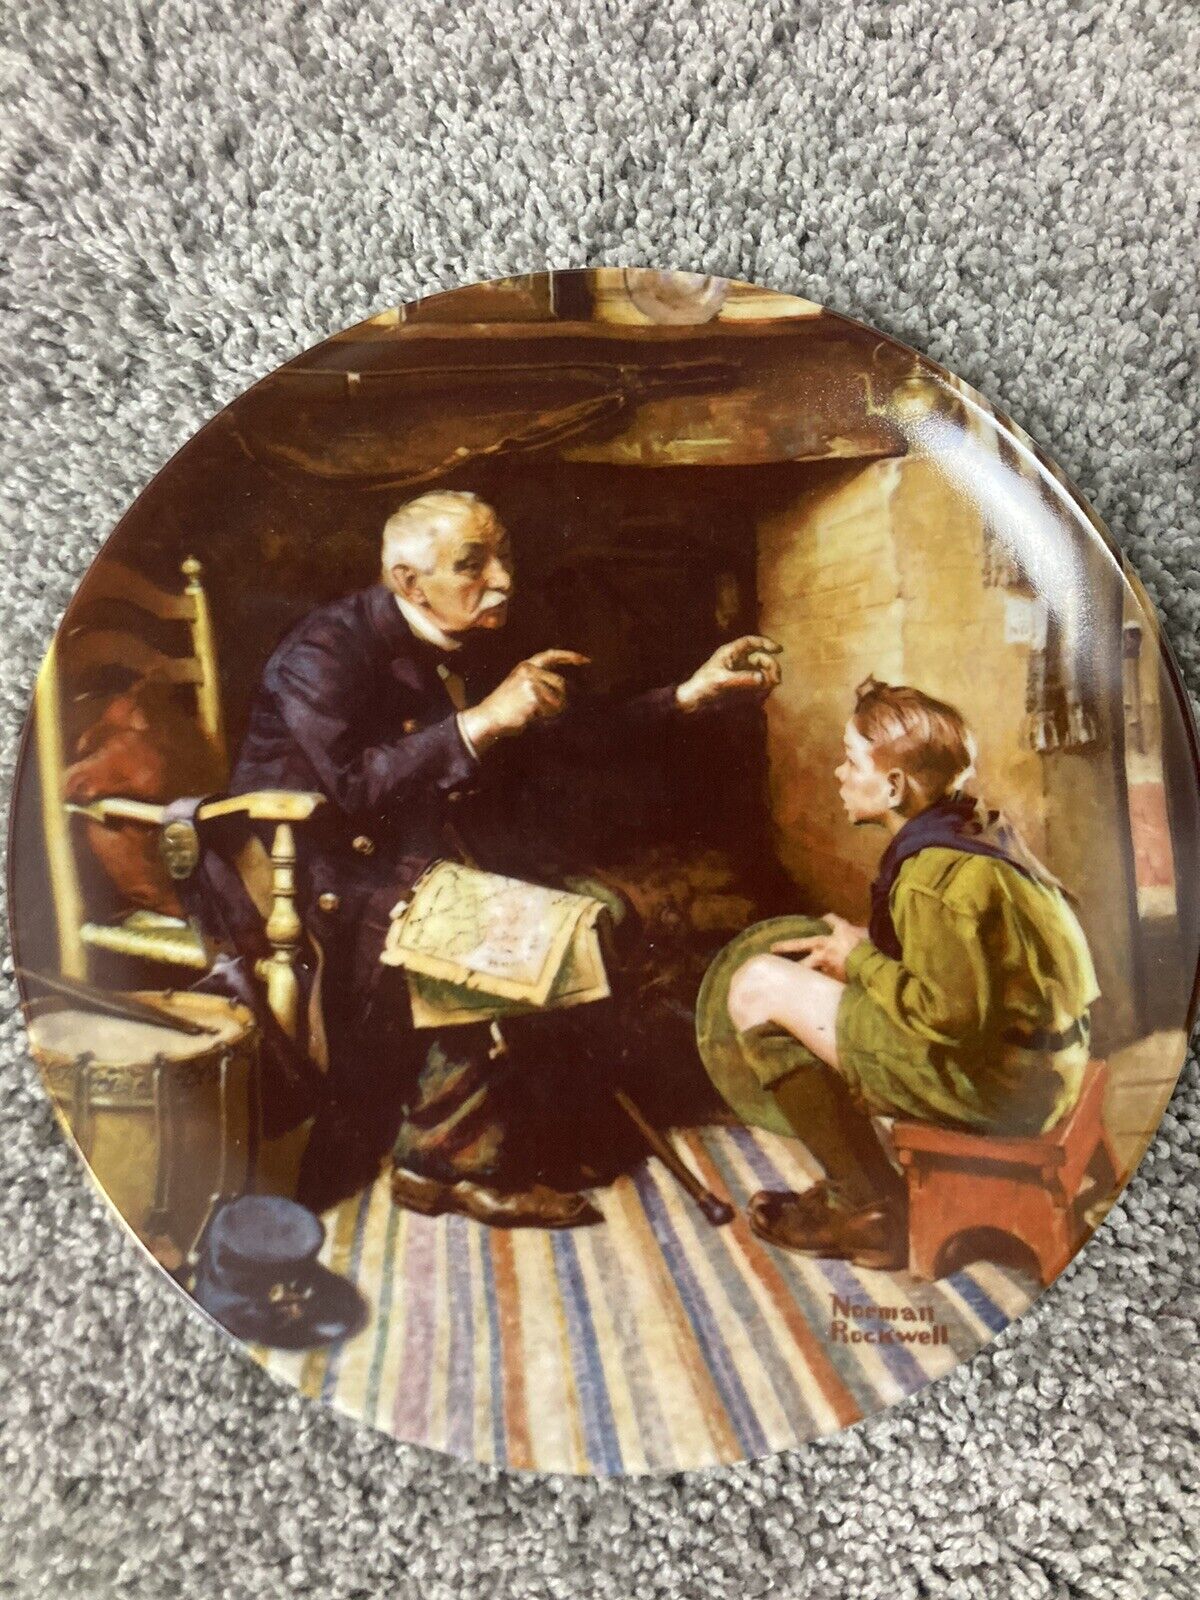 Knowles Norman Rockwell Collectors Plate - The Veteran - 1988